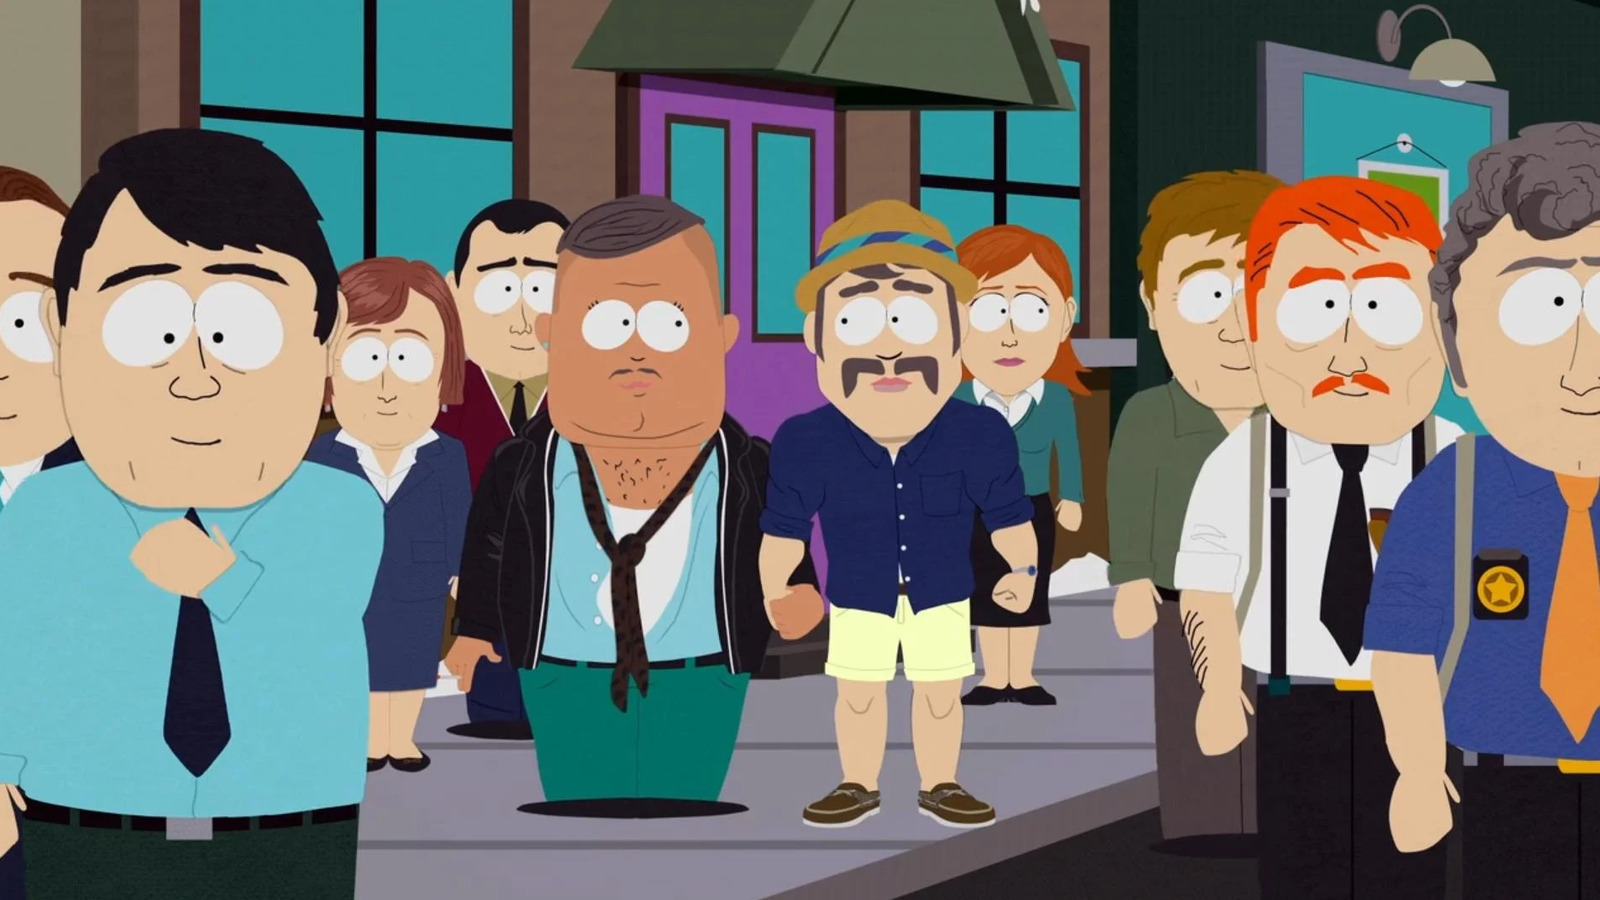 The Biggest Lesson More Comedies Need To Take From South Park